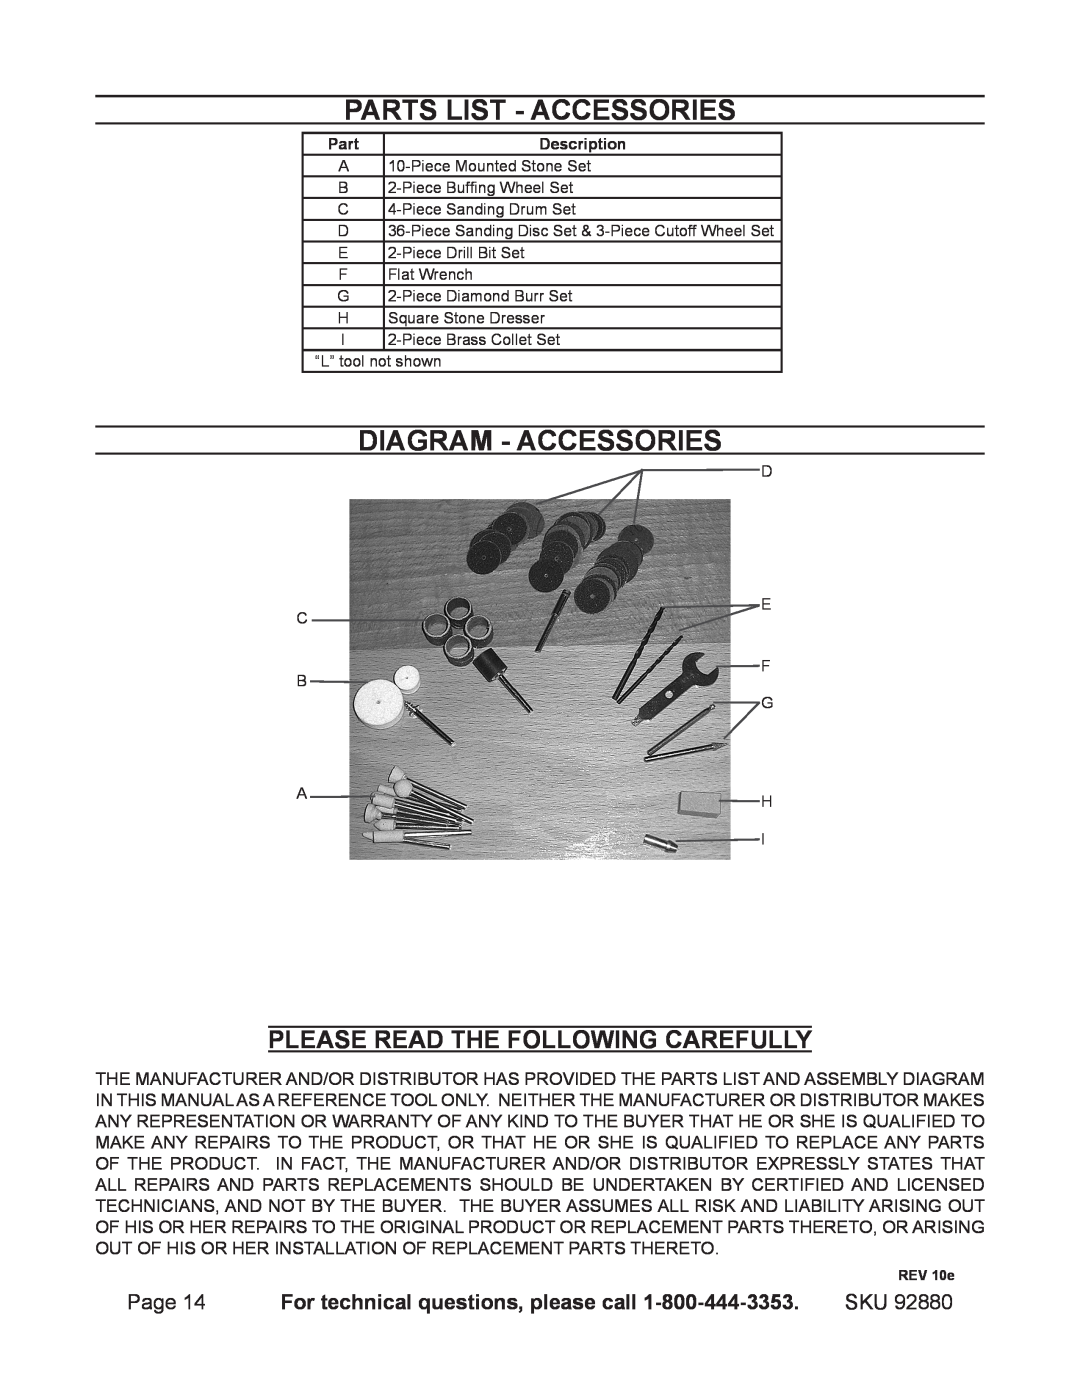 Chicago Electric 92880 Parts List - accessories, Diagram - Accessories, Please Read The Following Carefully 